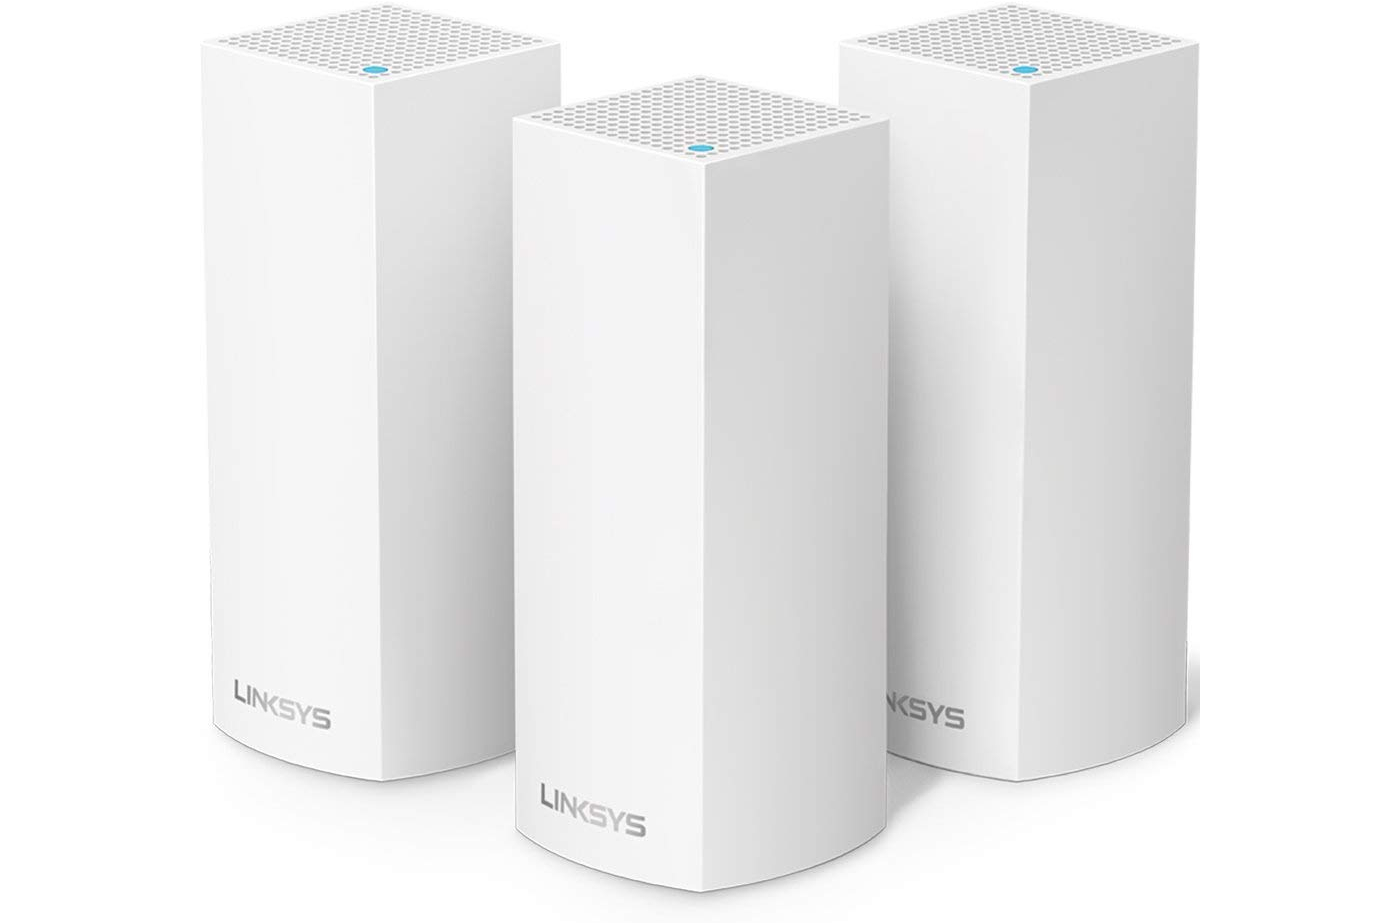 amazon slashes prices on linksys dual band and tri mesh wi fi routers velop home system  3 pack 01 1